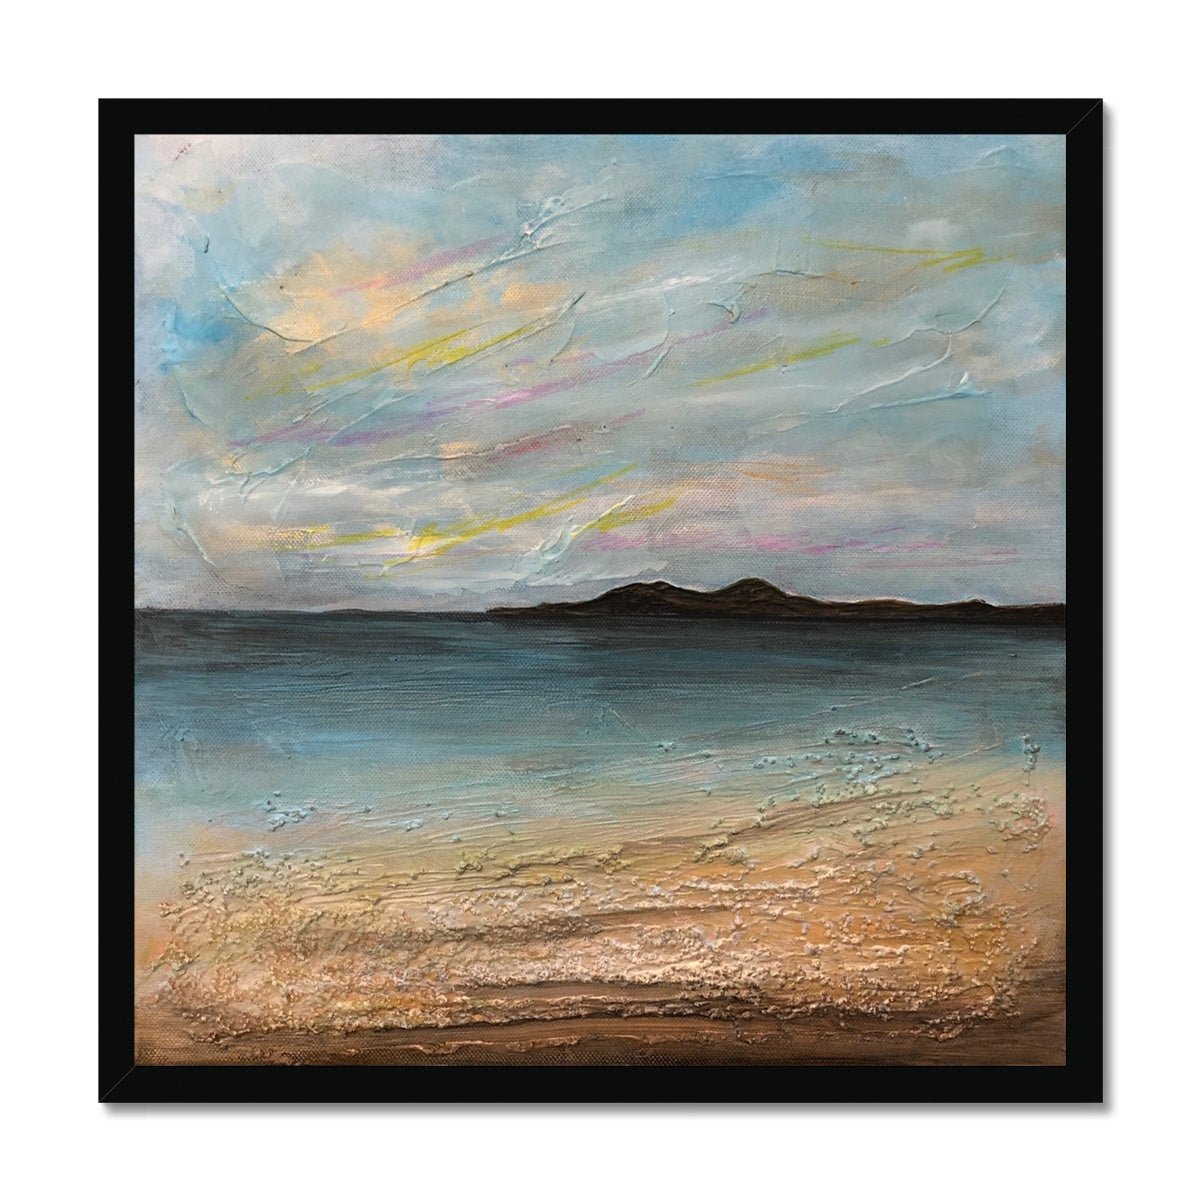 Garrynamonie Beach South Uist Painting | Framed Prints From Scotland-Framed Prints-Hebridean Islands Art Gallery-20"x20"-Black Frame-Paintings, Prints, Homeware, Art Gifts From Scotland By Scottish Artist Kevin Hunter